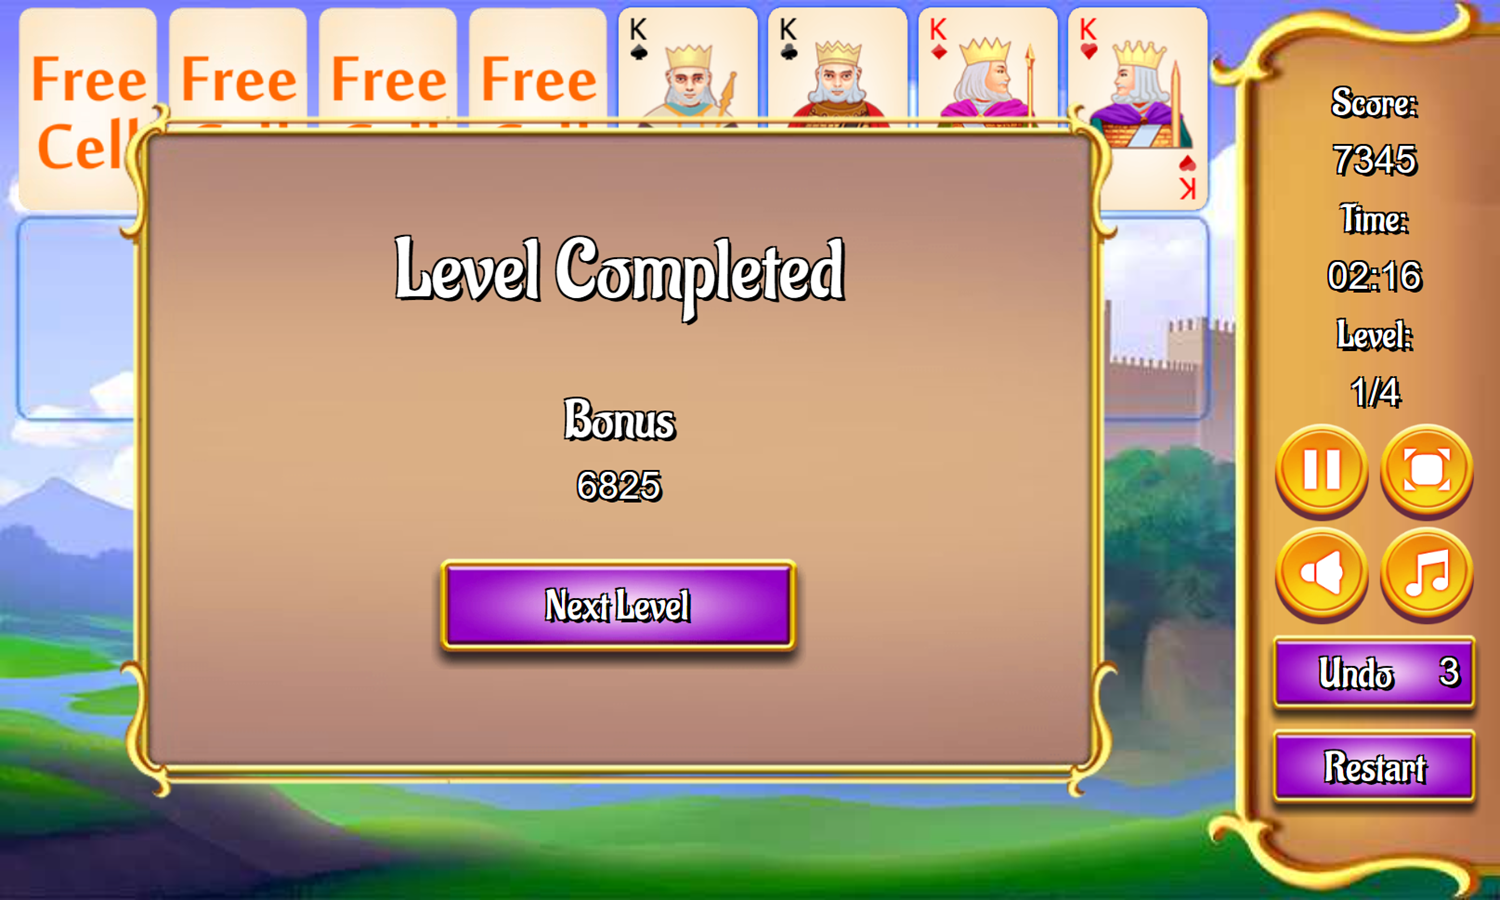 Stronghold Solitaire Game Level Completed Screenshot.